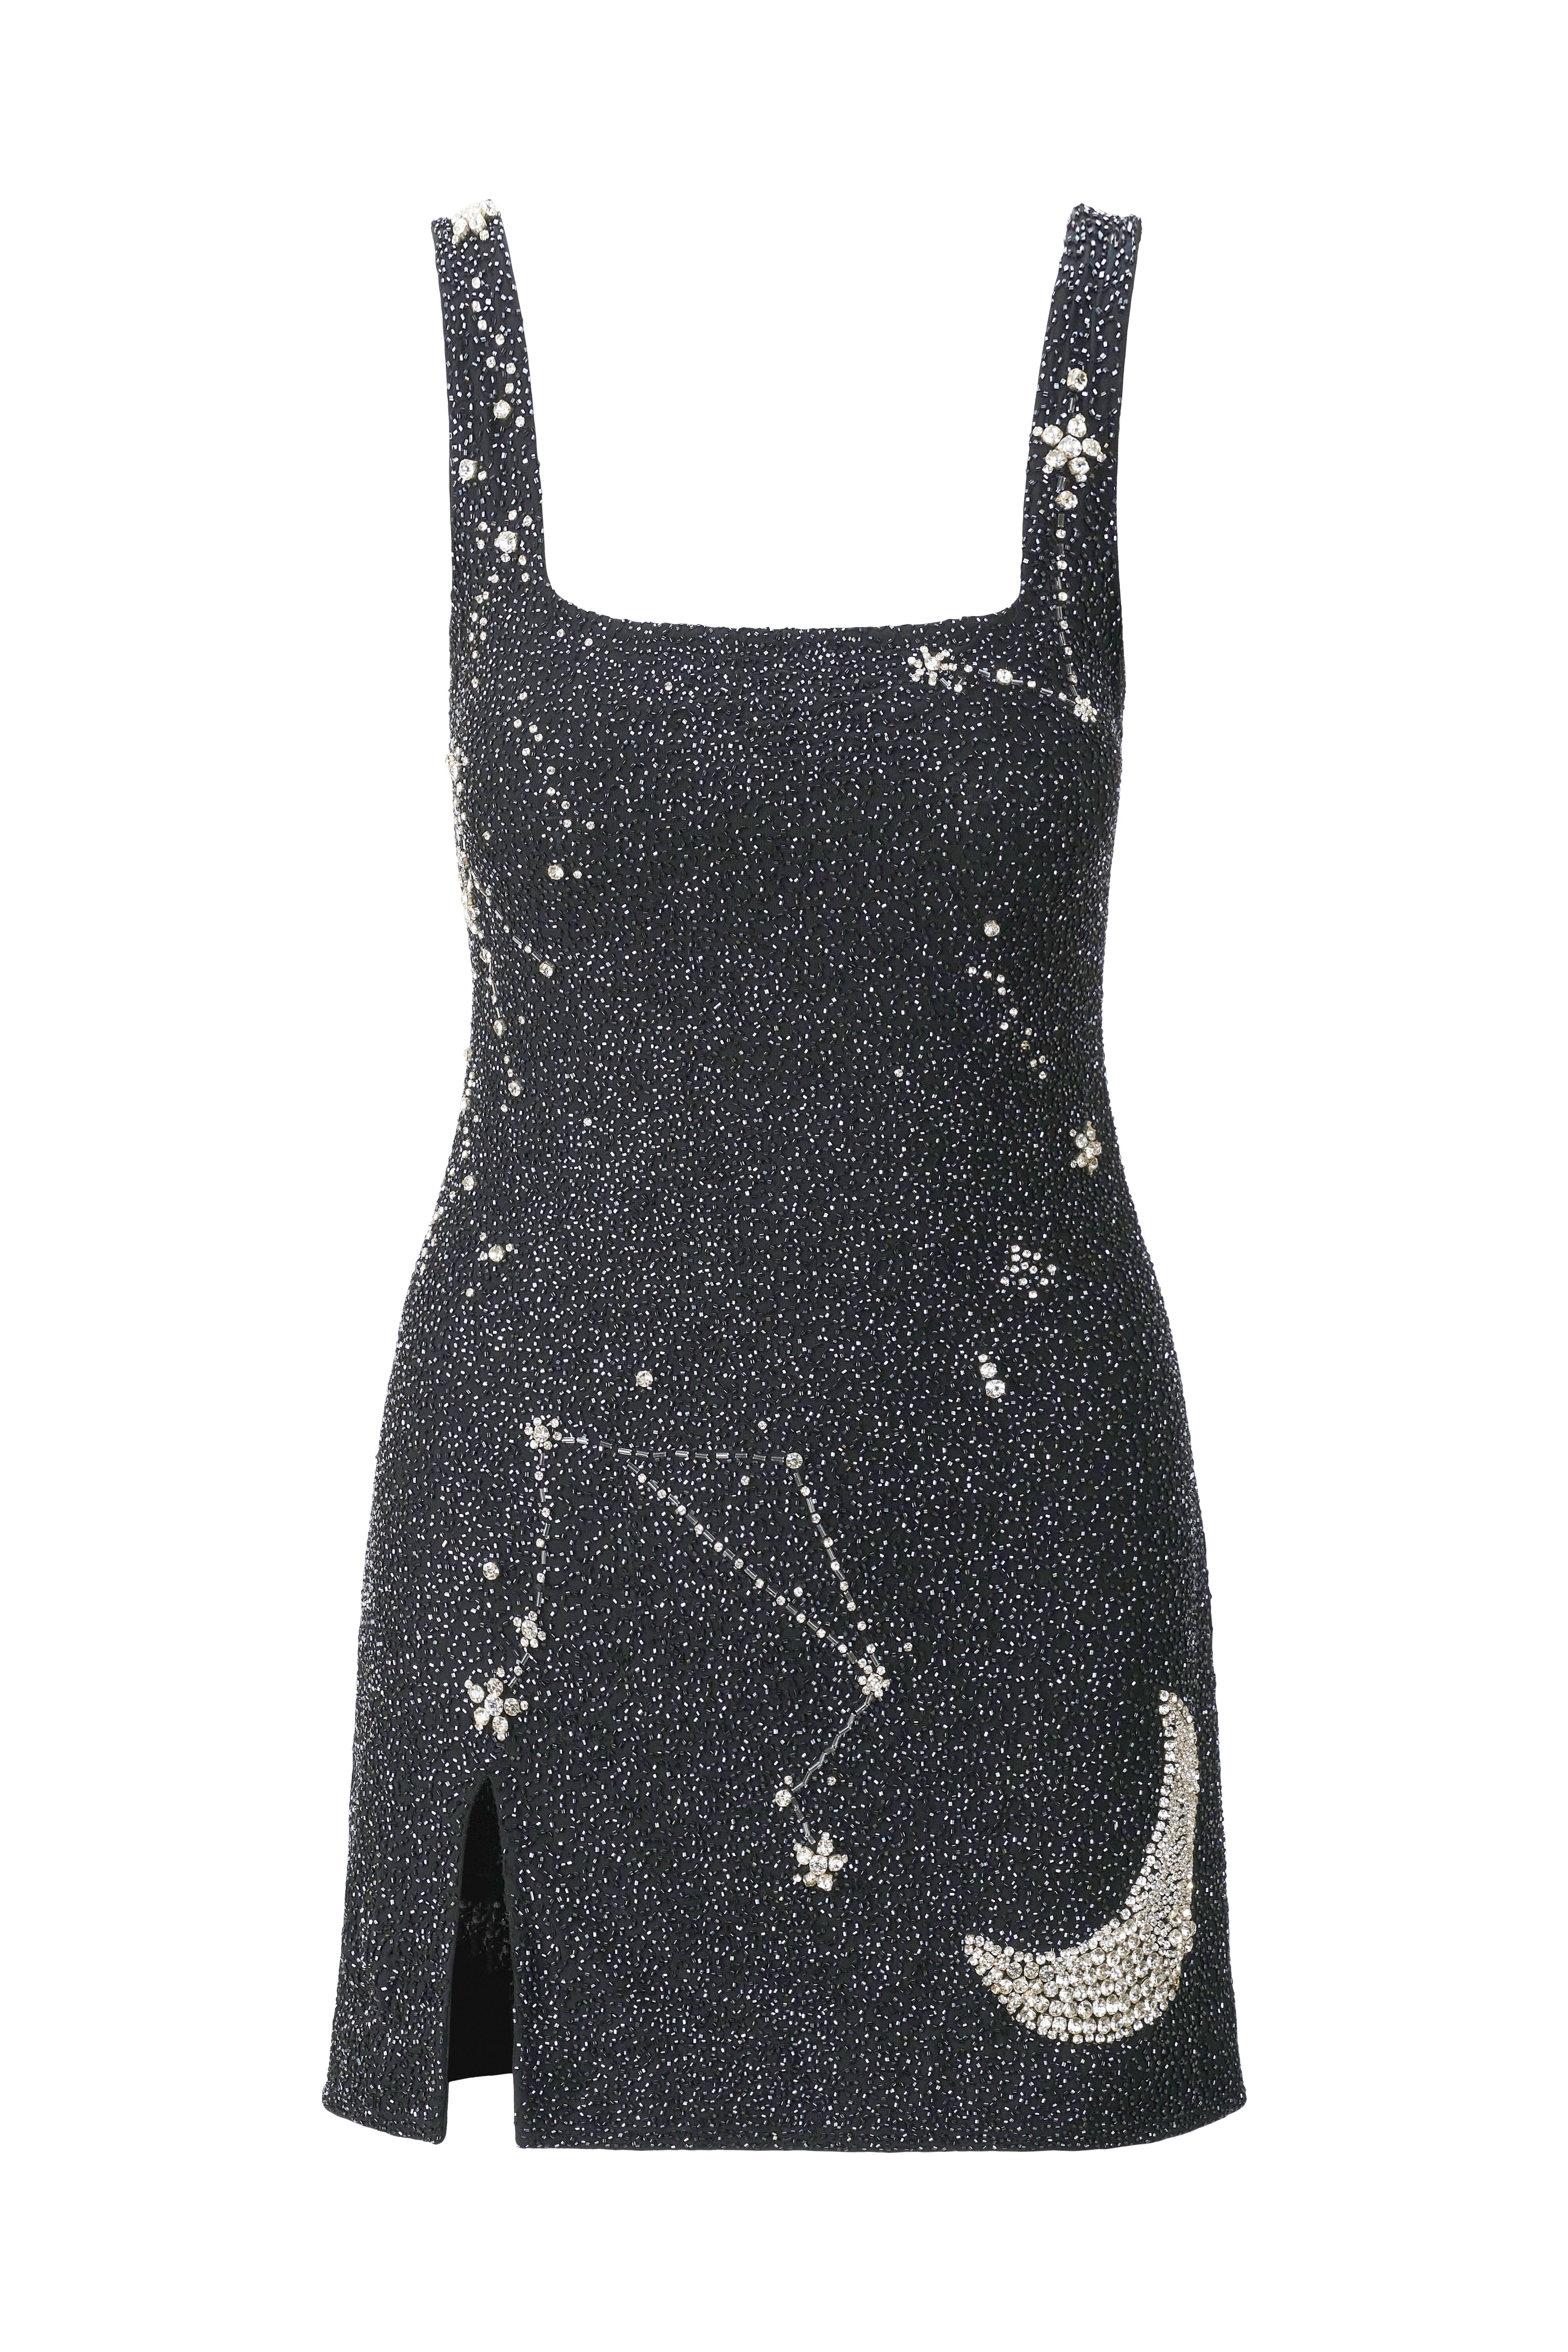 LE SABLE DRESS | STARRY NIGHT